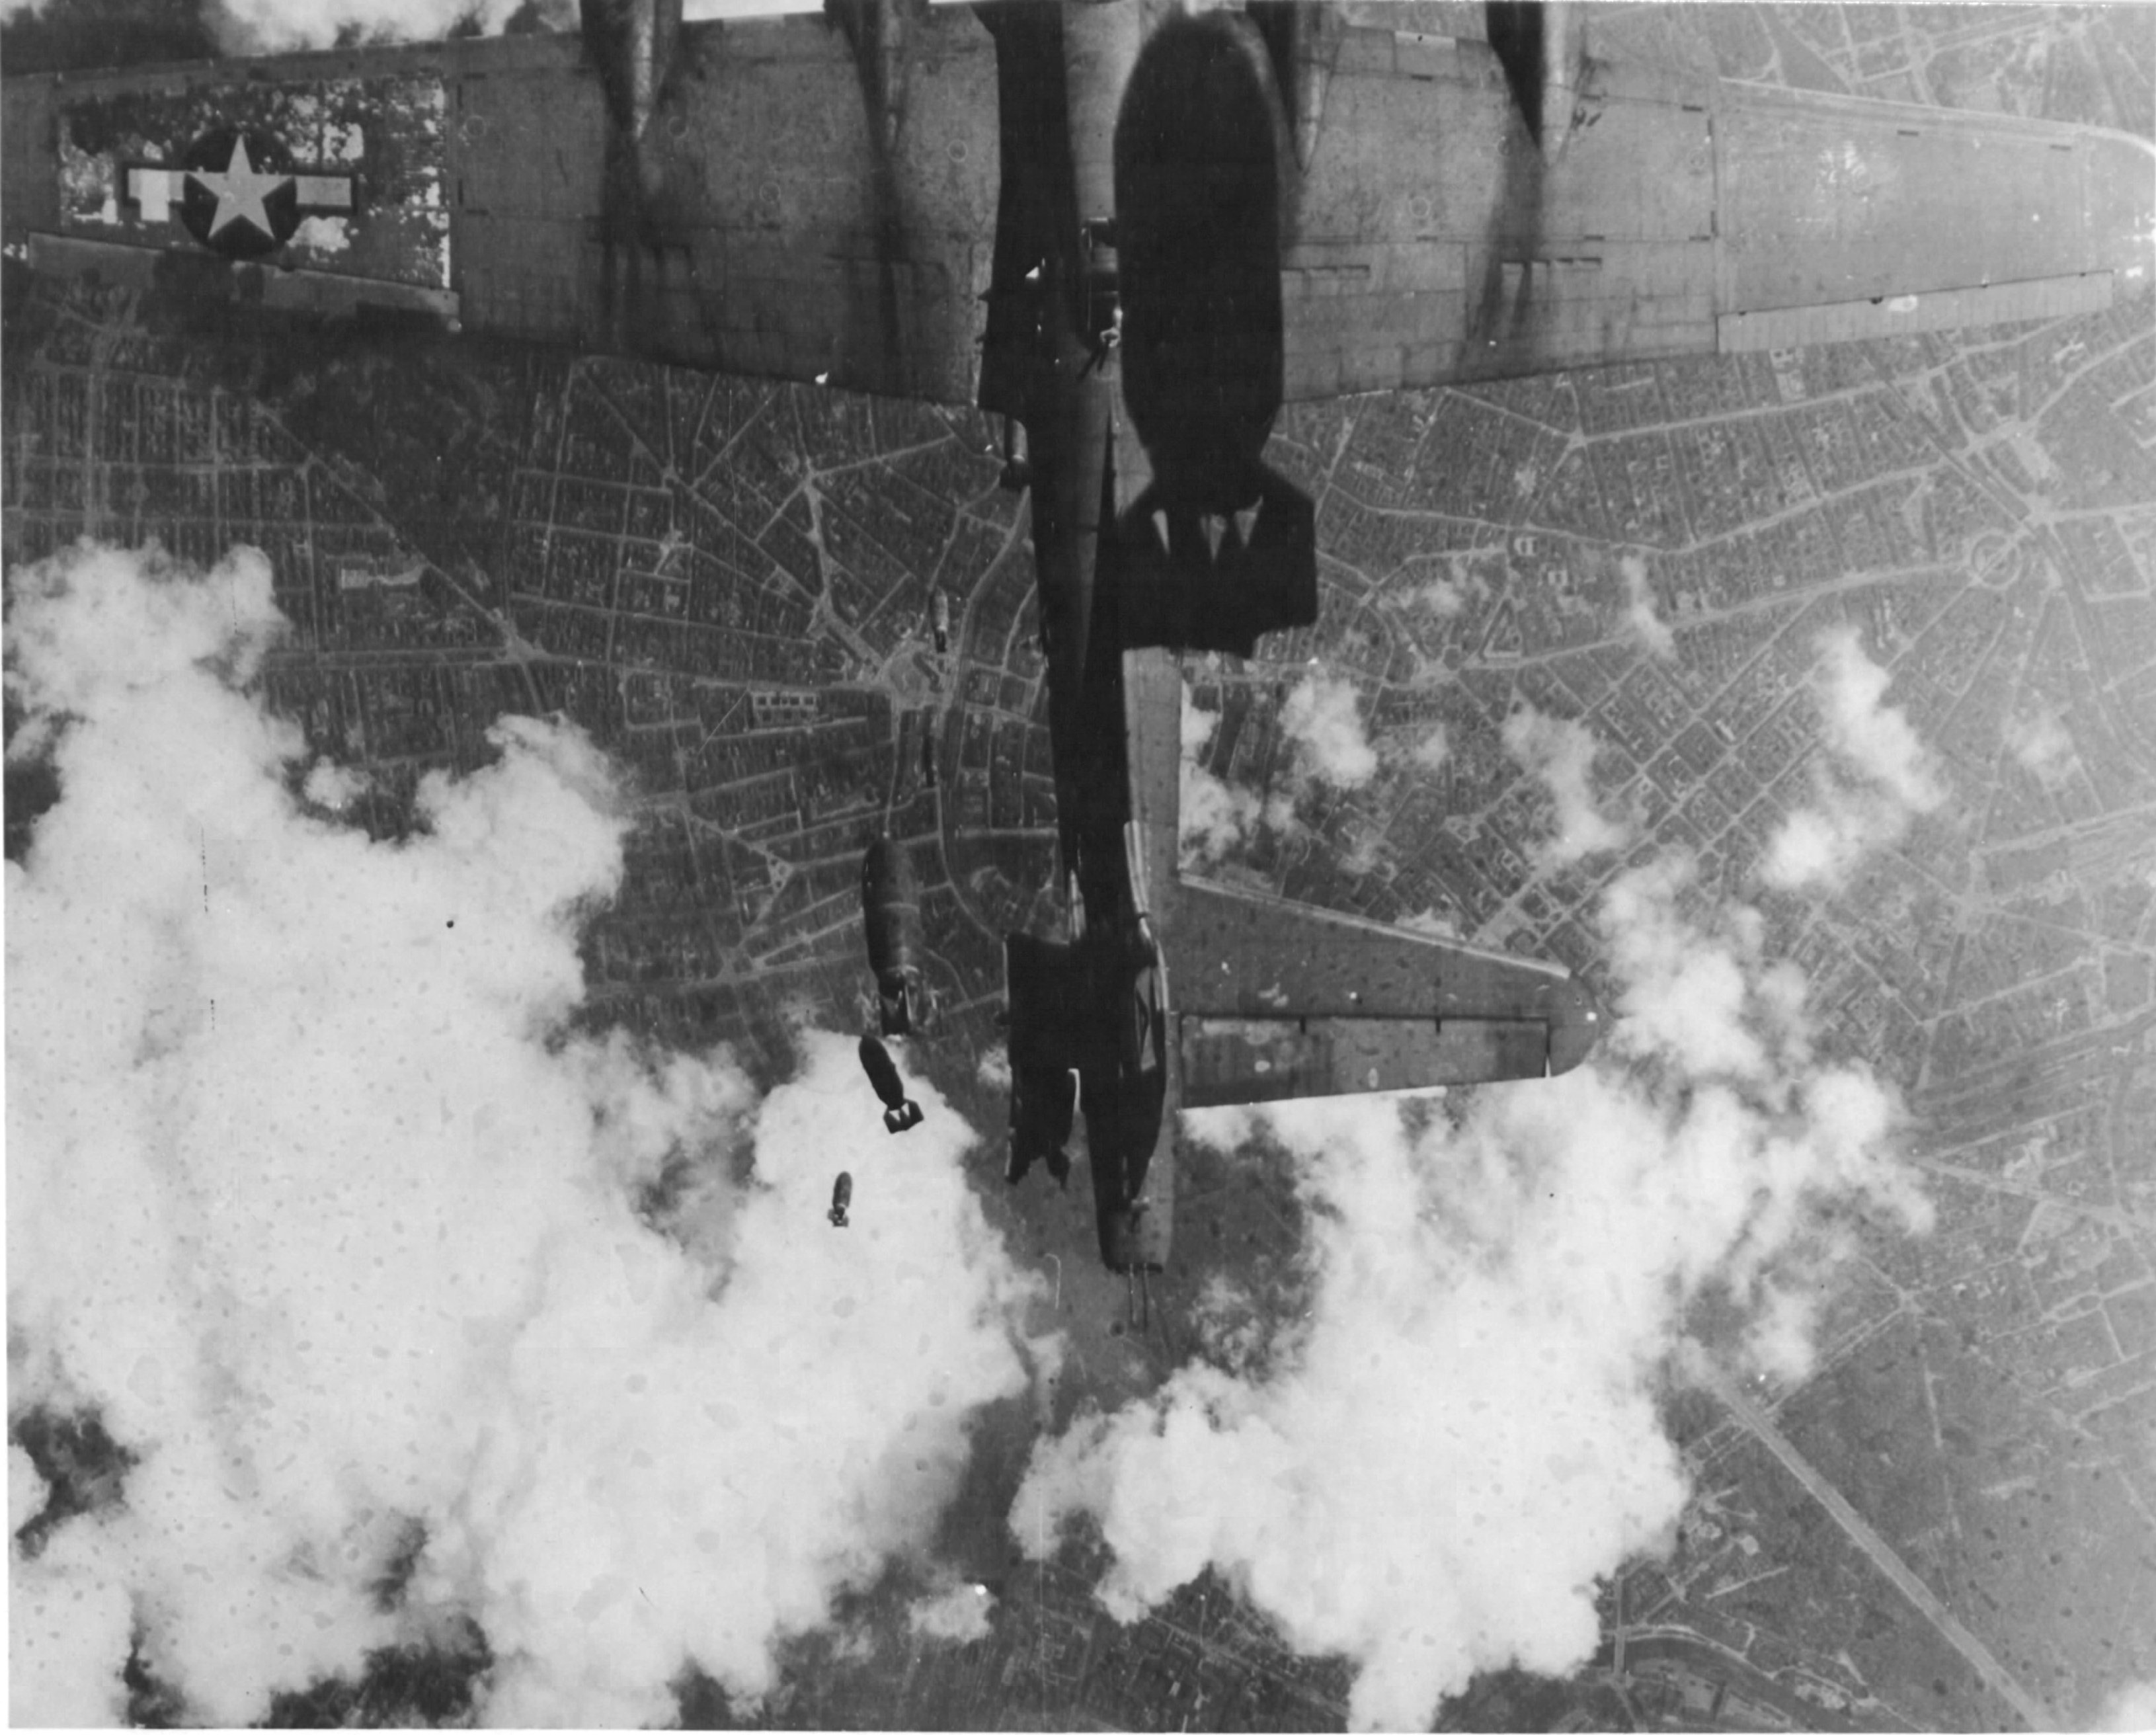 B-17G Fortress 'Miss Donna Mae II' drifted under another bomber on a bomb run over Berlin, 19 May 1944. A 1,000 lb bomb from above tore off the left stabilizer and sent the plane into an uncontrollable spin. All 11 were killed. Photo 2 of 4